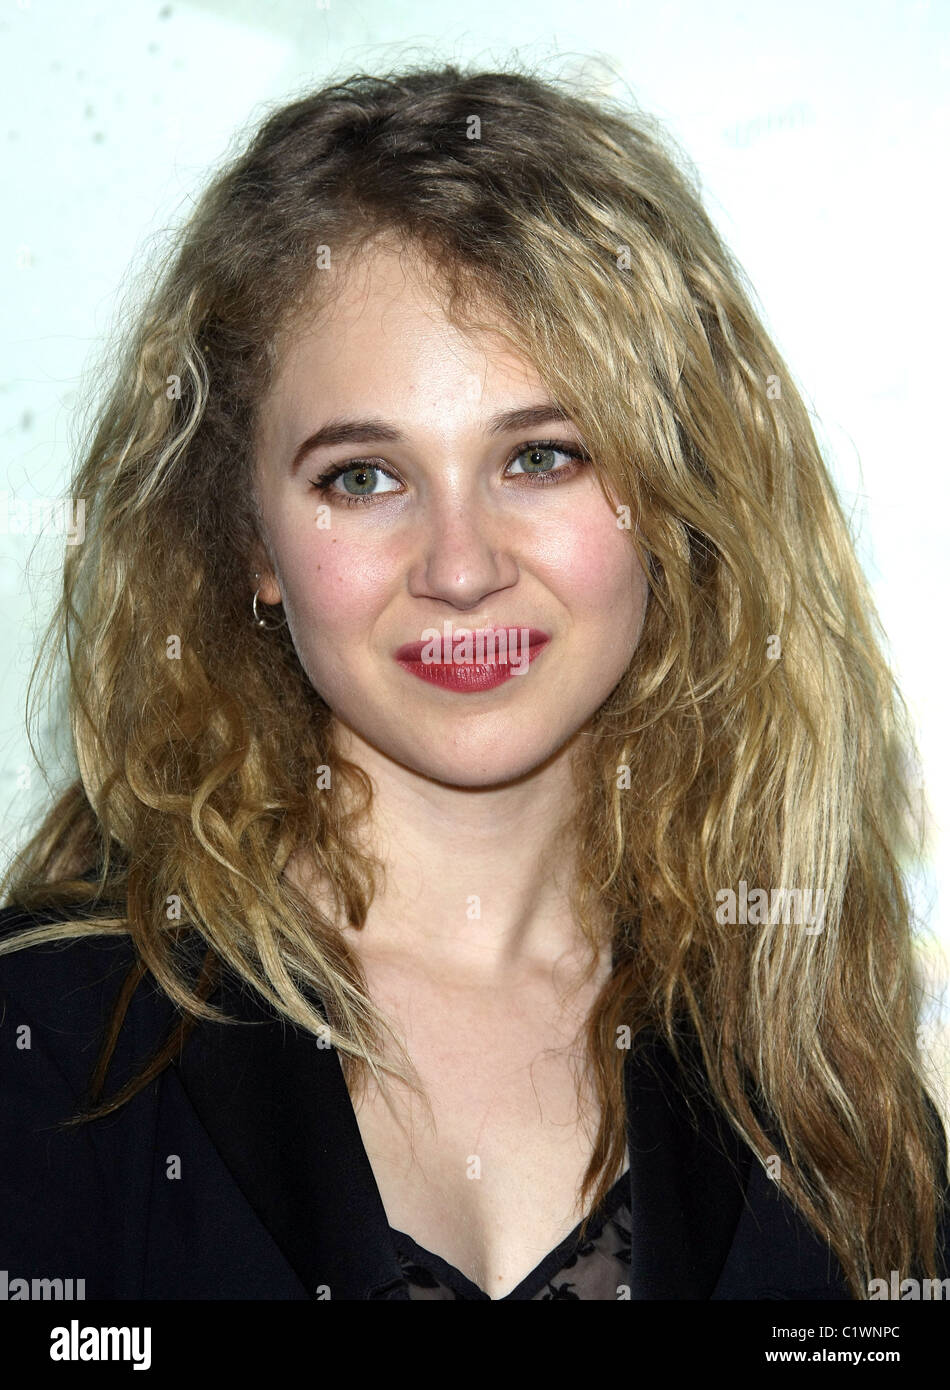 JUNO TEMPLE SUCKER PUNCH. WORLD PREMIERE WARNER BROS. PICTURES HOLLYWOOD LOS ANGELES CALIFORNIA USA 23 March 2011 Stock Photo